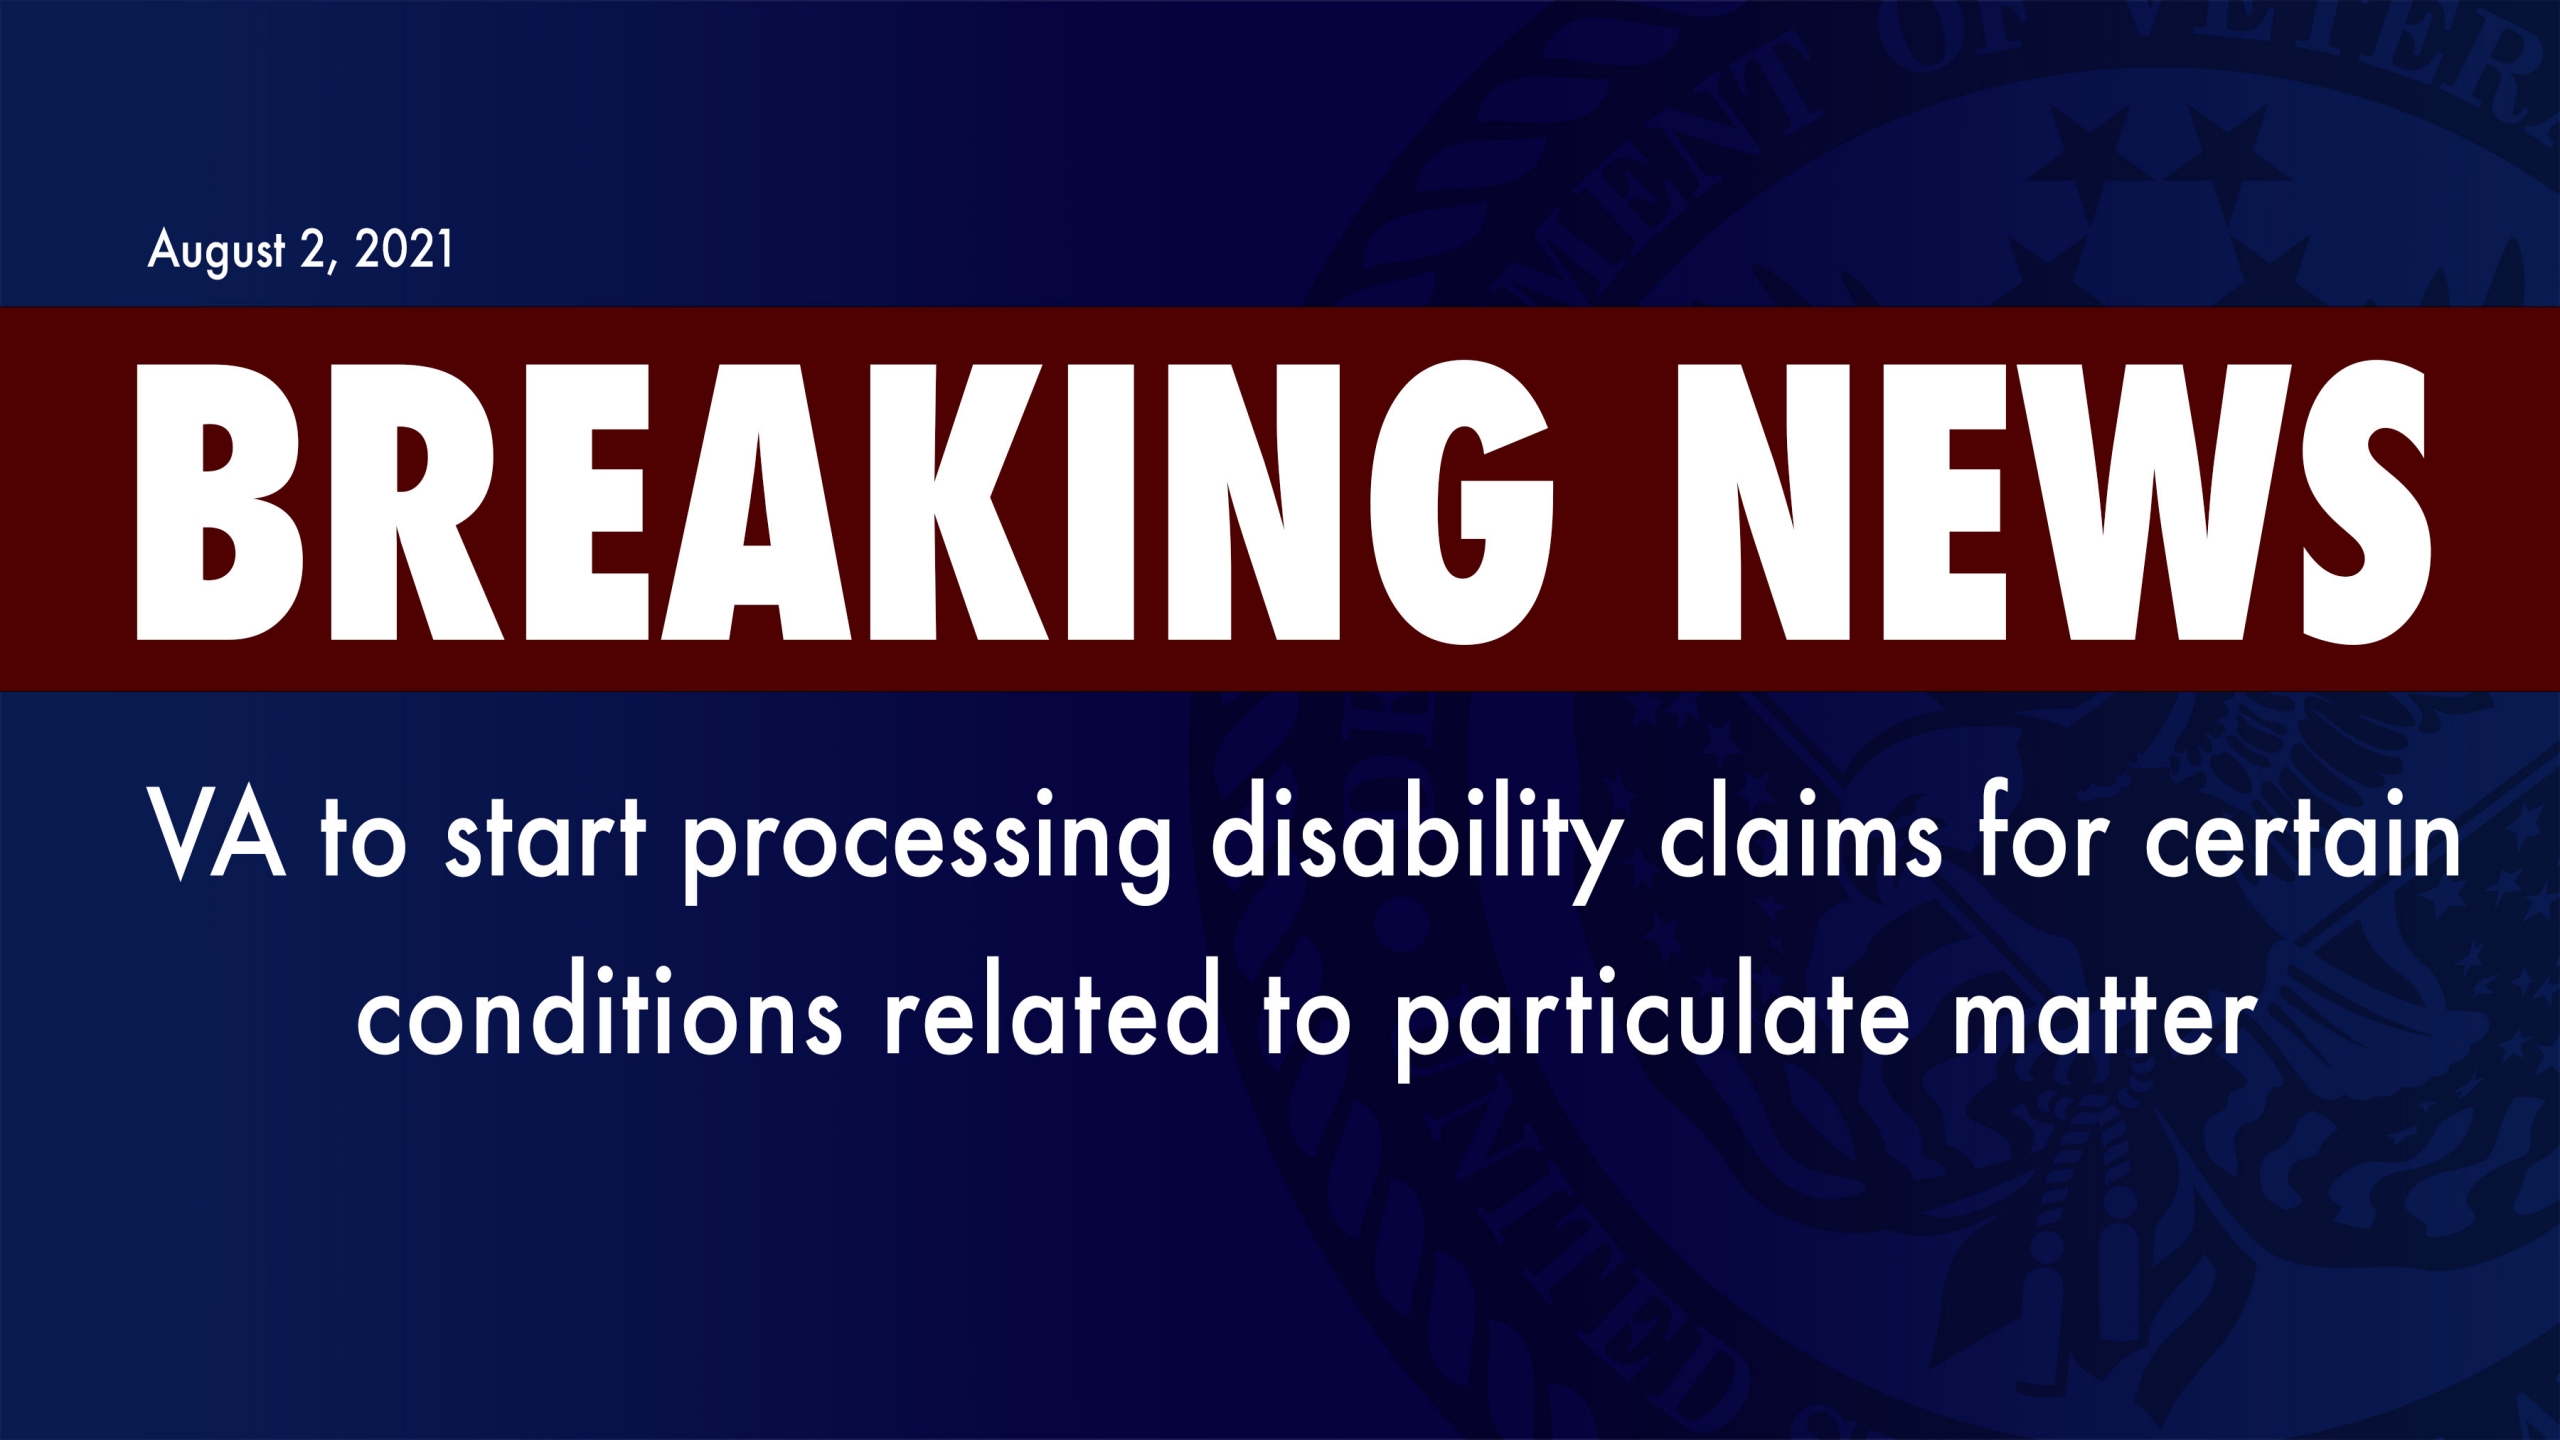 VA to begin processing disability claims for Particulate Matter Exposure